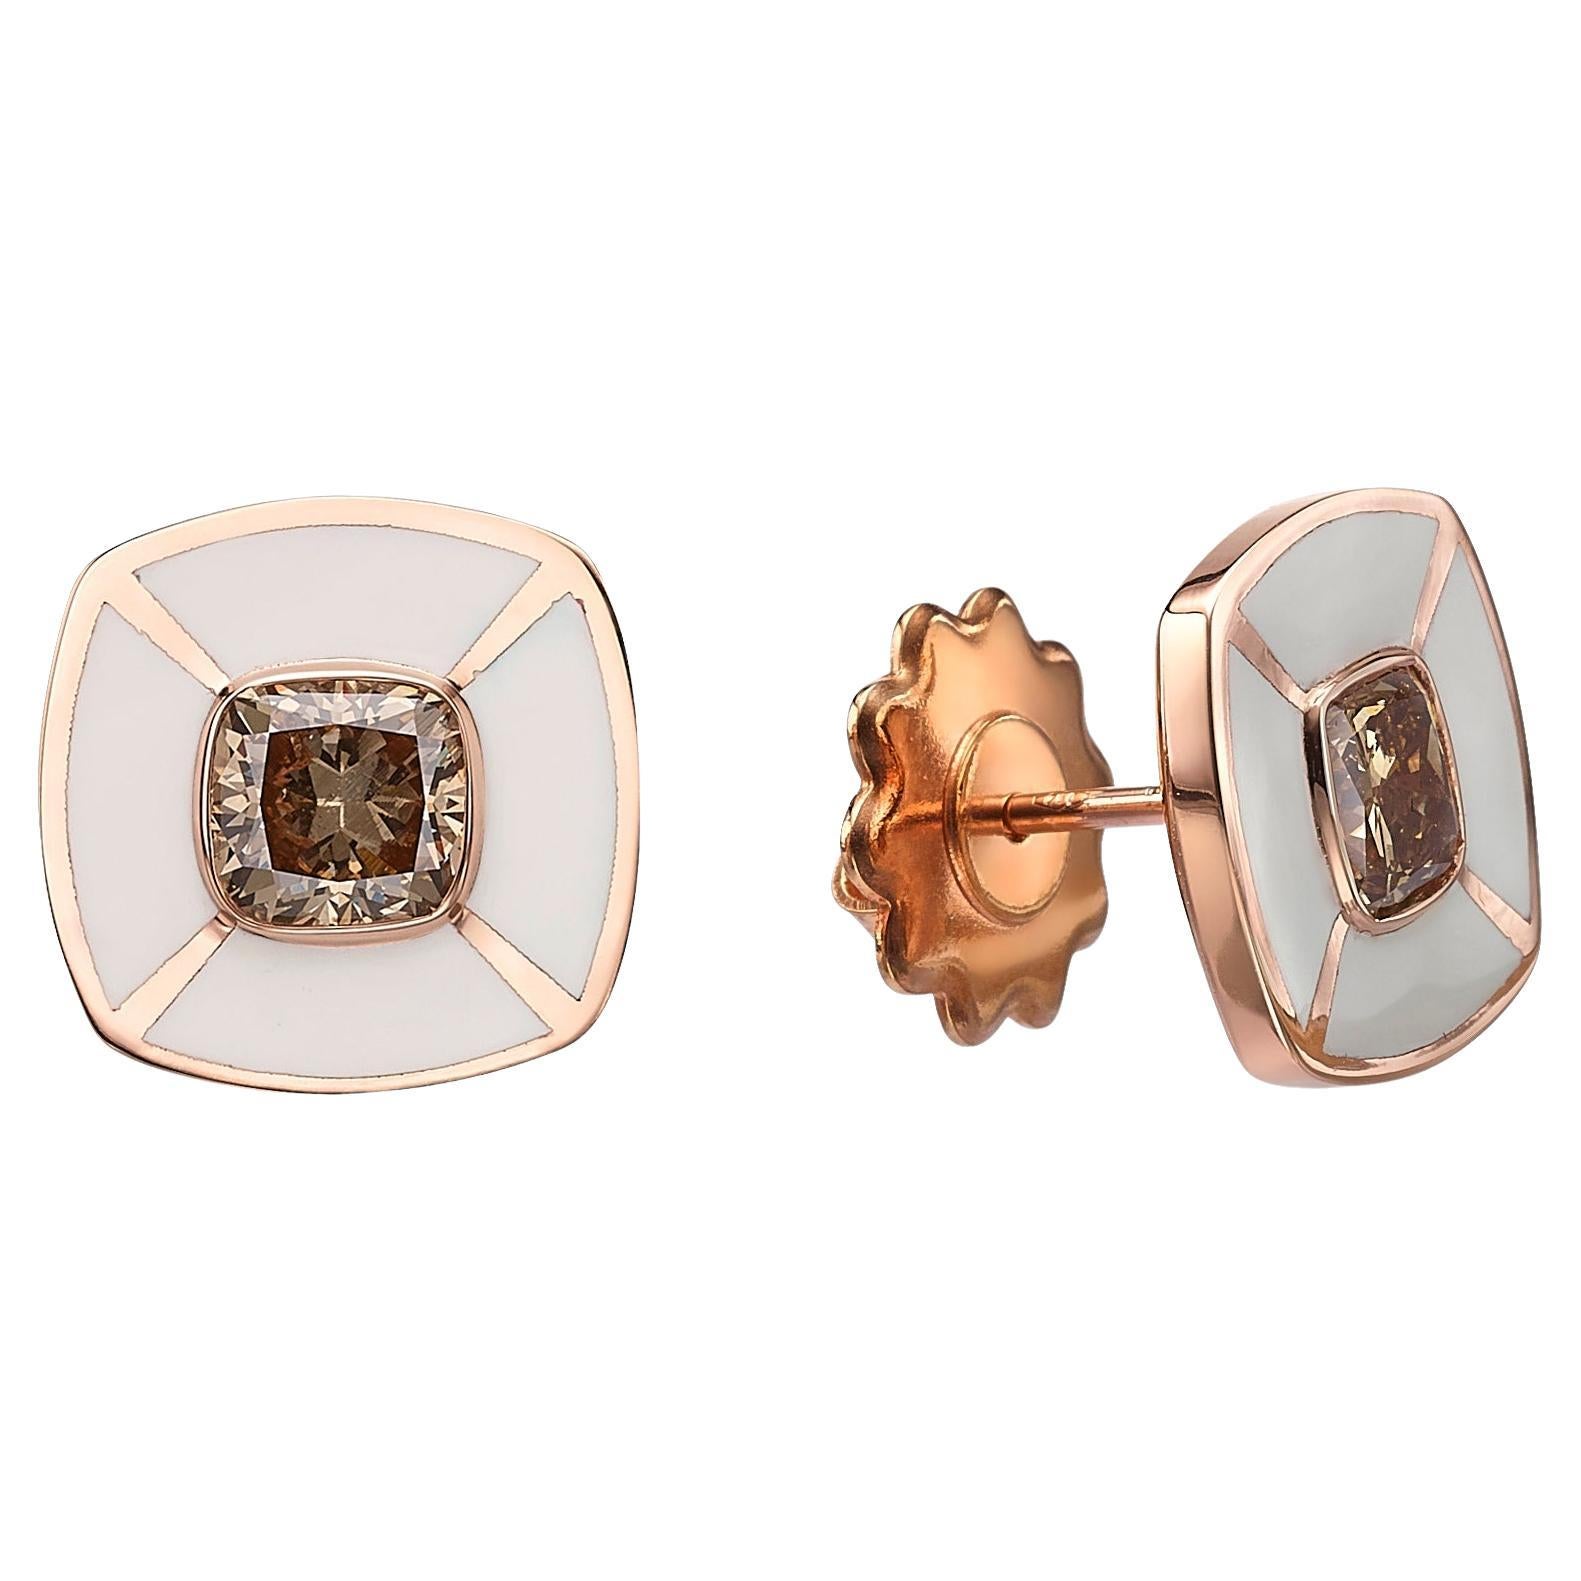 Venice Collection: 18k Rose Gold Stud diamond Earrings with White Enamel